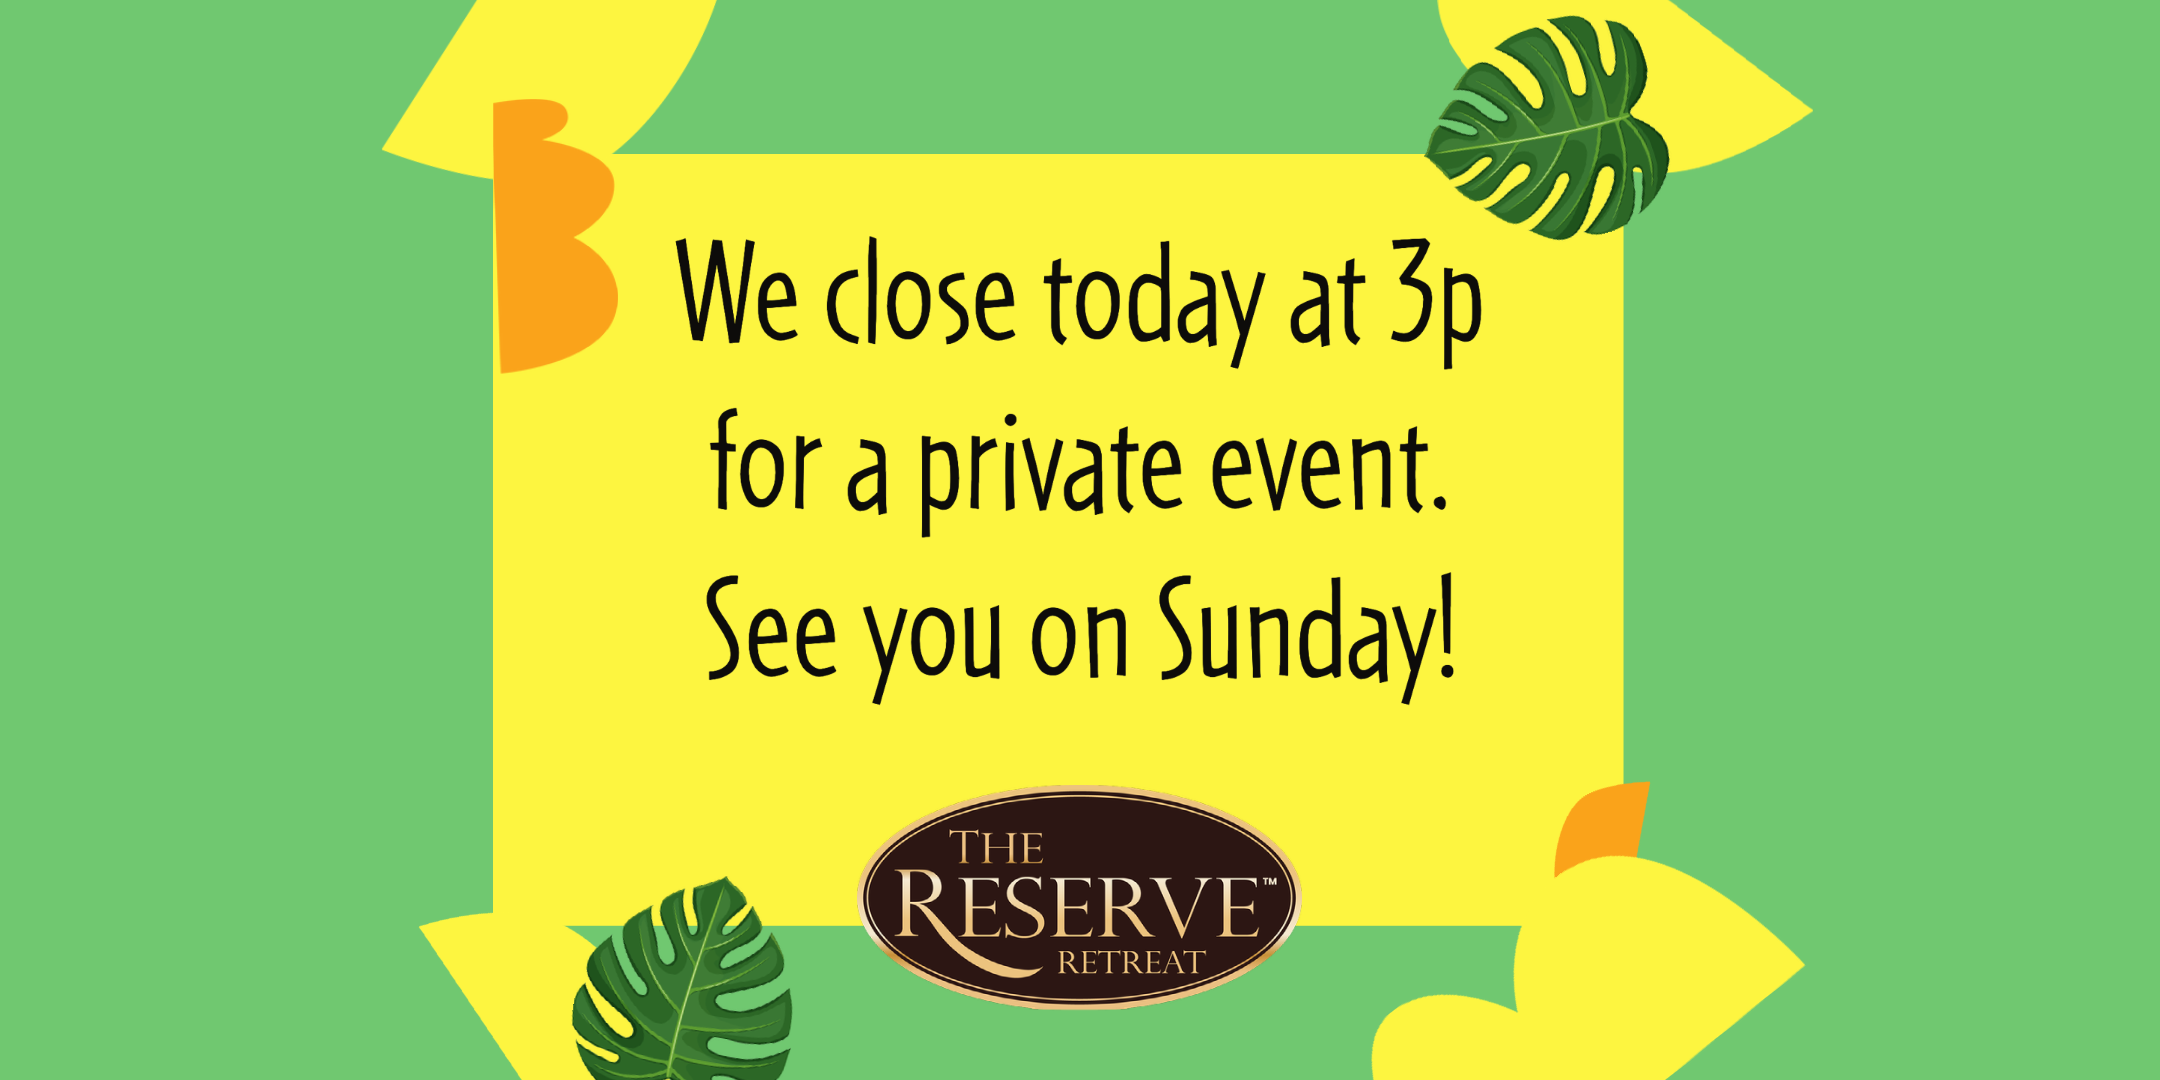 The Reserve Retreat is closing early today. See your tomorrow for Sunday Brunch!